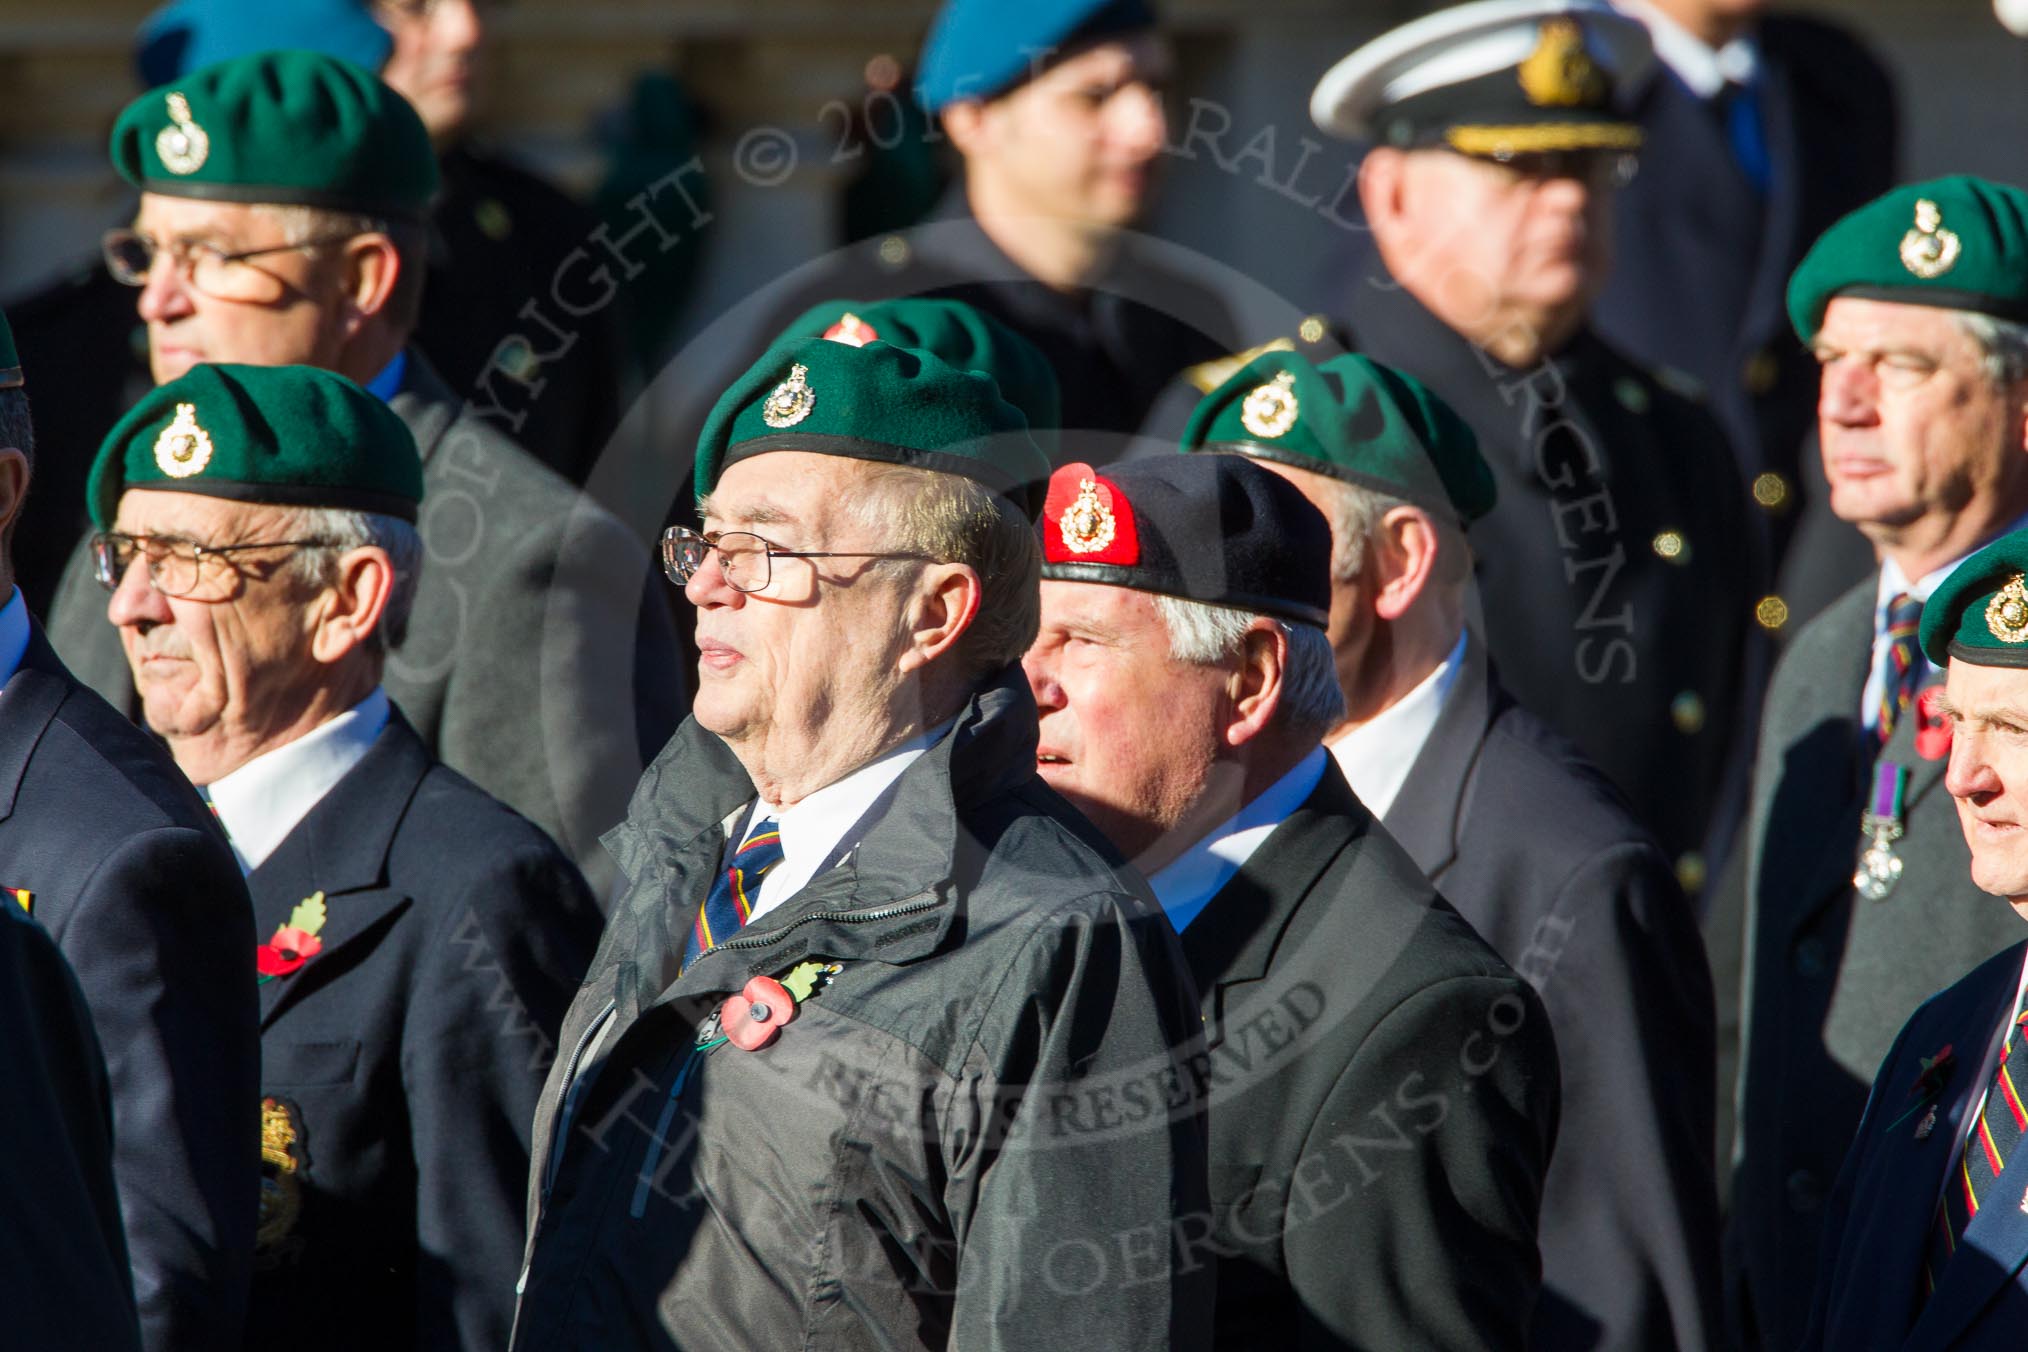 Remembrance Sunday Cenotaph March Past 2013: E3 - Royal Marines Association..
Press stand opposite the Foreign Office building, Whitehall, London SW1,
London,
Greater London,
United Kingdom,
on 10 November 2013 at 11:44, image #381